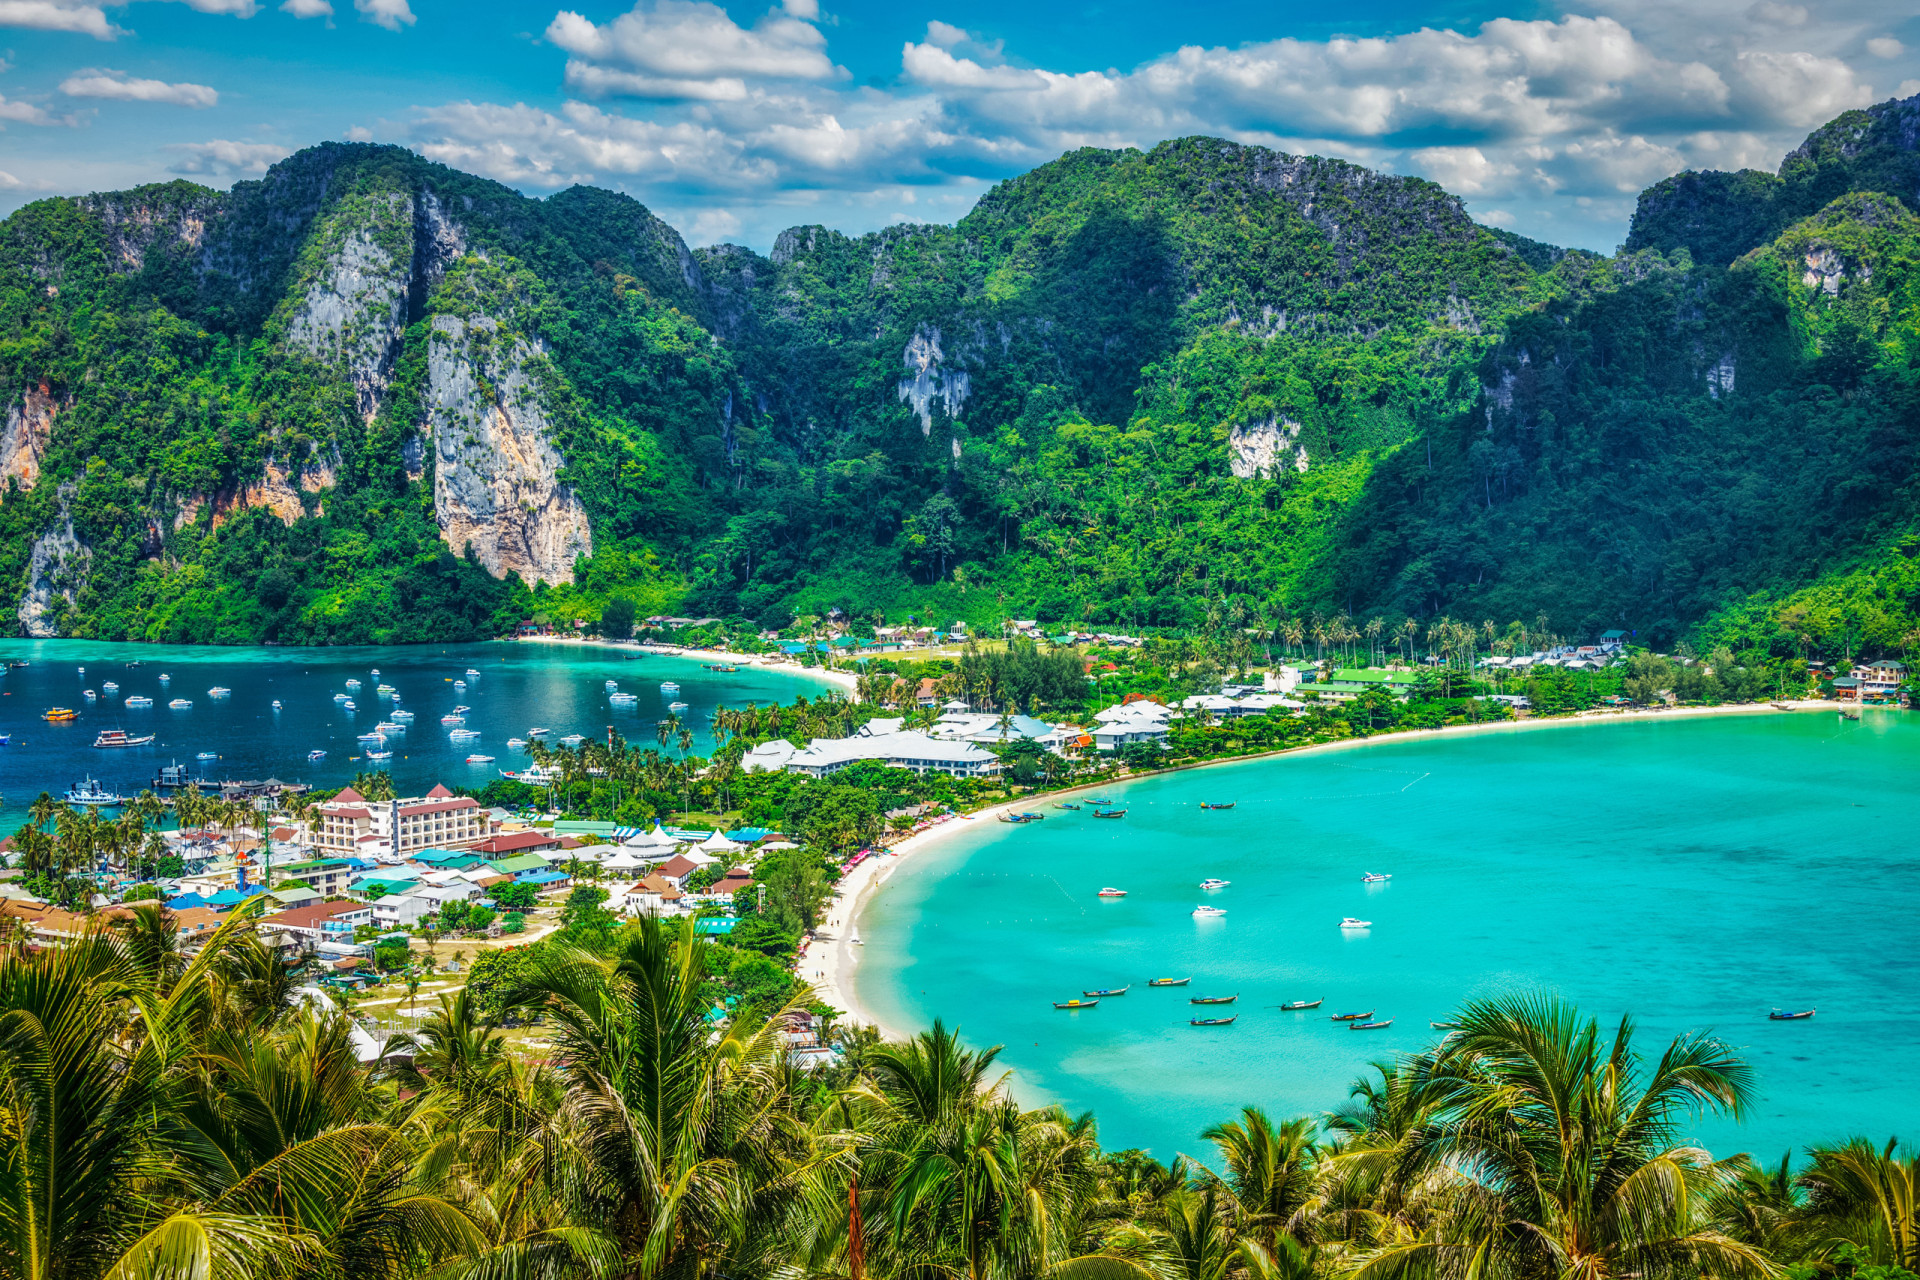 <p>Thailand introduced a tourist tax to the price of flights in April 2022. The fee for all international visitors is 300 baht (US$8.44).</p><p><a href="https://www.msn.com/en-my/community/channel/vid-7xx8mnucu55yw63we9va2gwr7uihbxwc68fxqp25x6tg4ftibpra?cvid=94631541bc0f4f89bfd59158d696ad7e">Follow us and access great exclusive content every day</a></p>